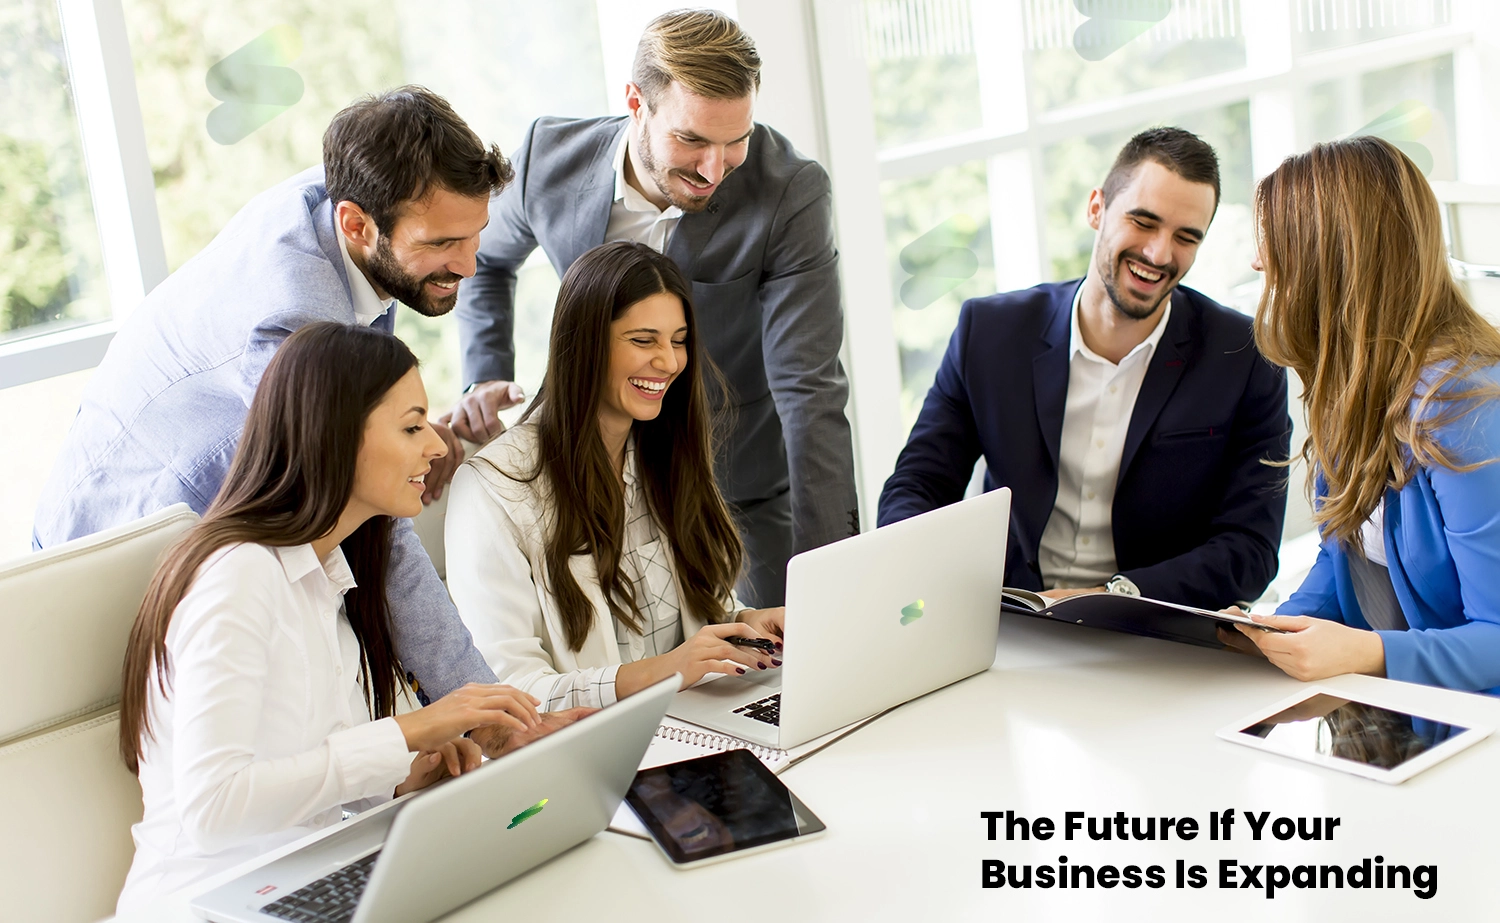 ways to get ready for the future of your business